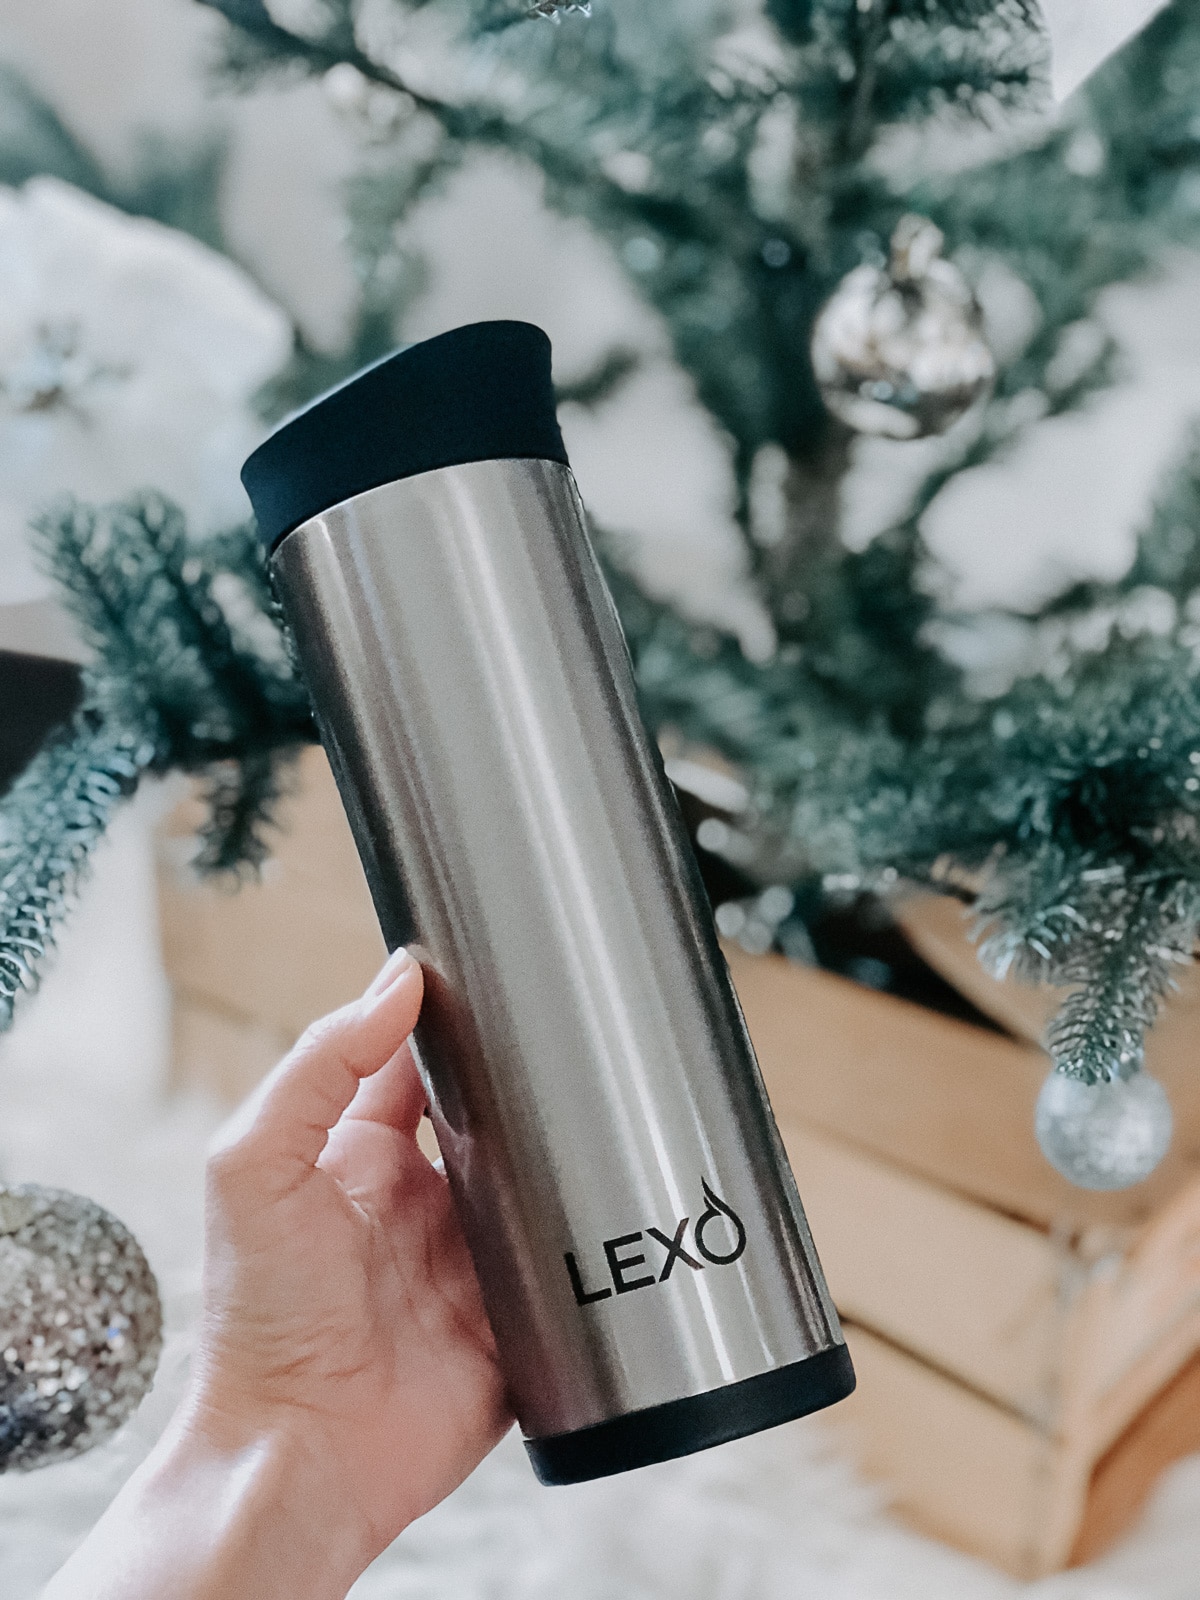 25 Days of Giveaways: Day 16 - LEXO Smart Tumbler • The Naptime Reviewer